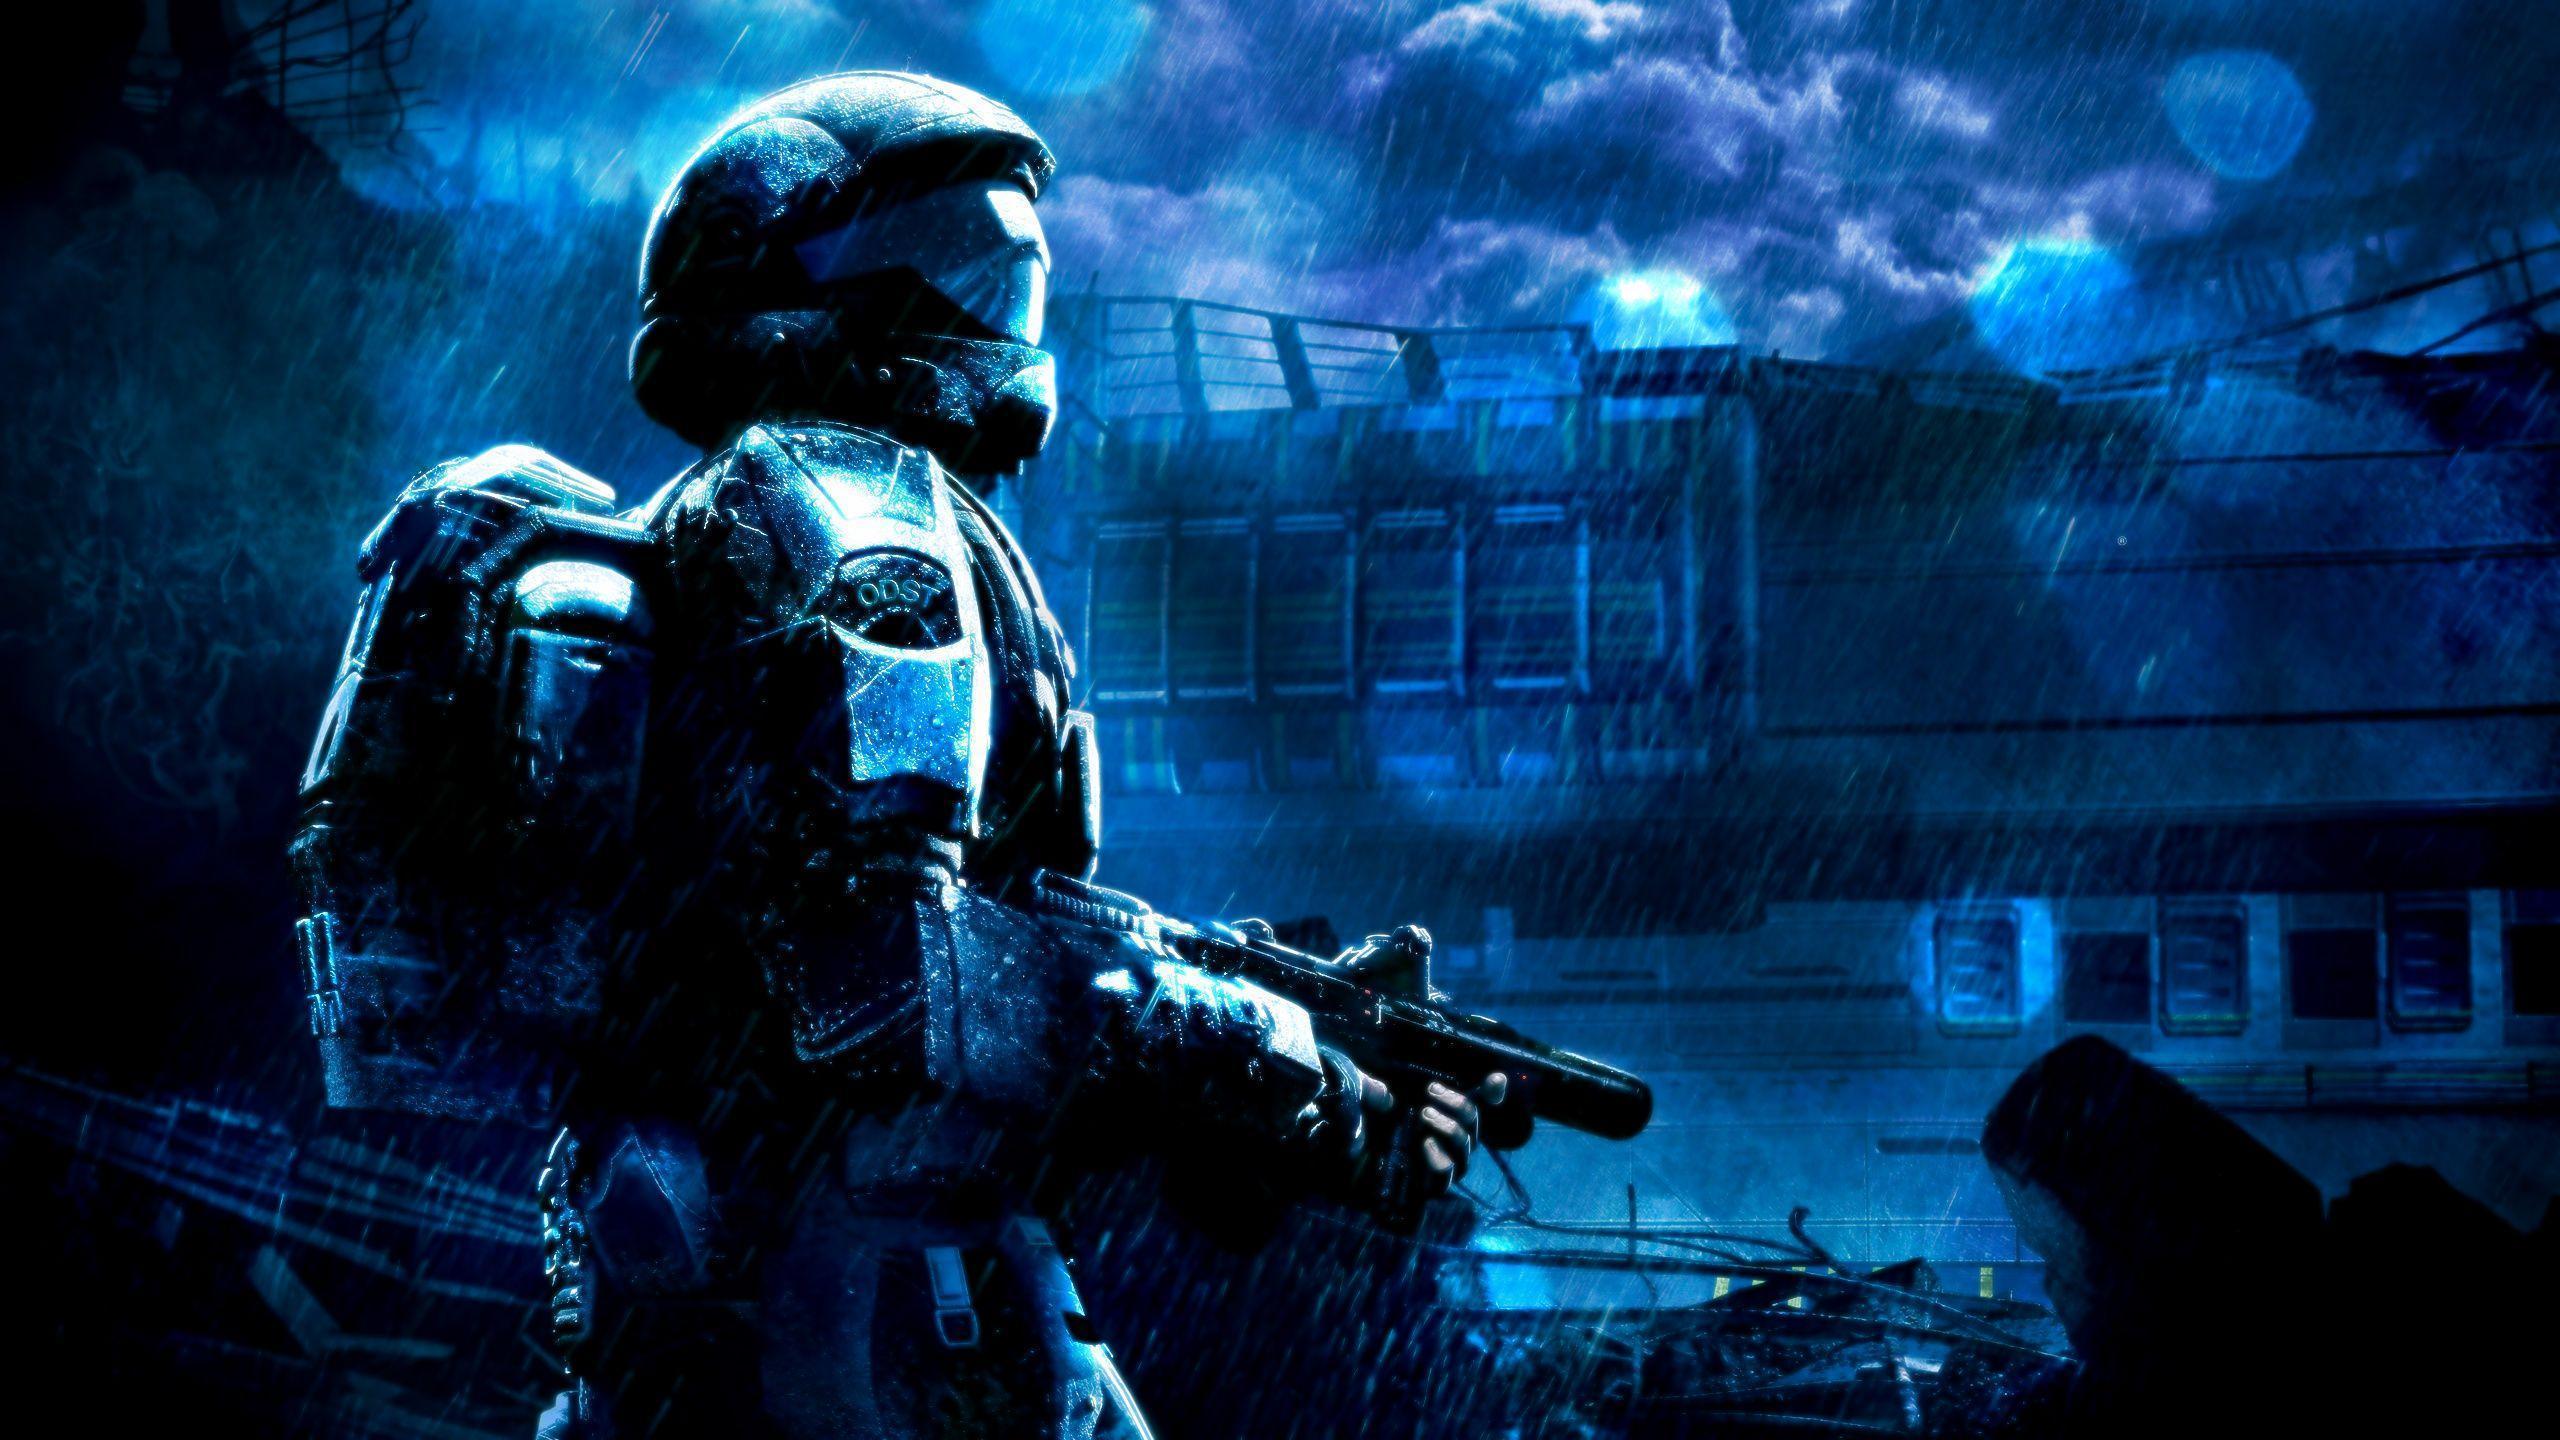 Halo 3: ODST HD Wallpaper and Background Image